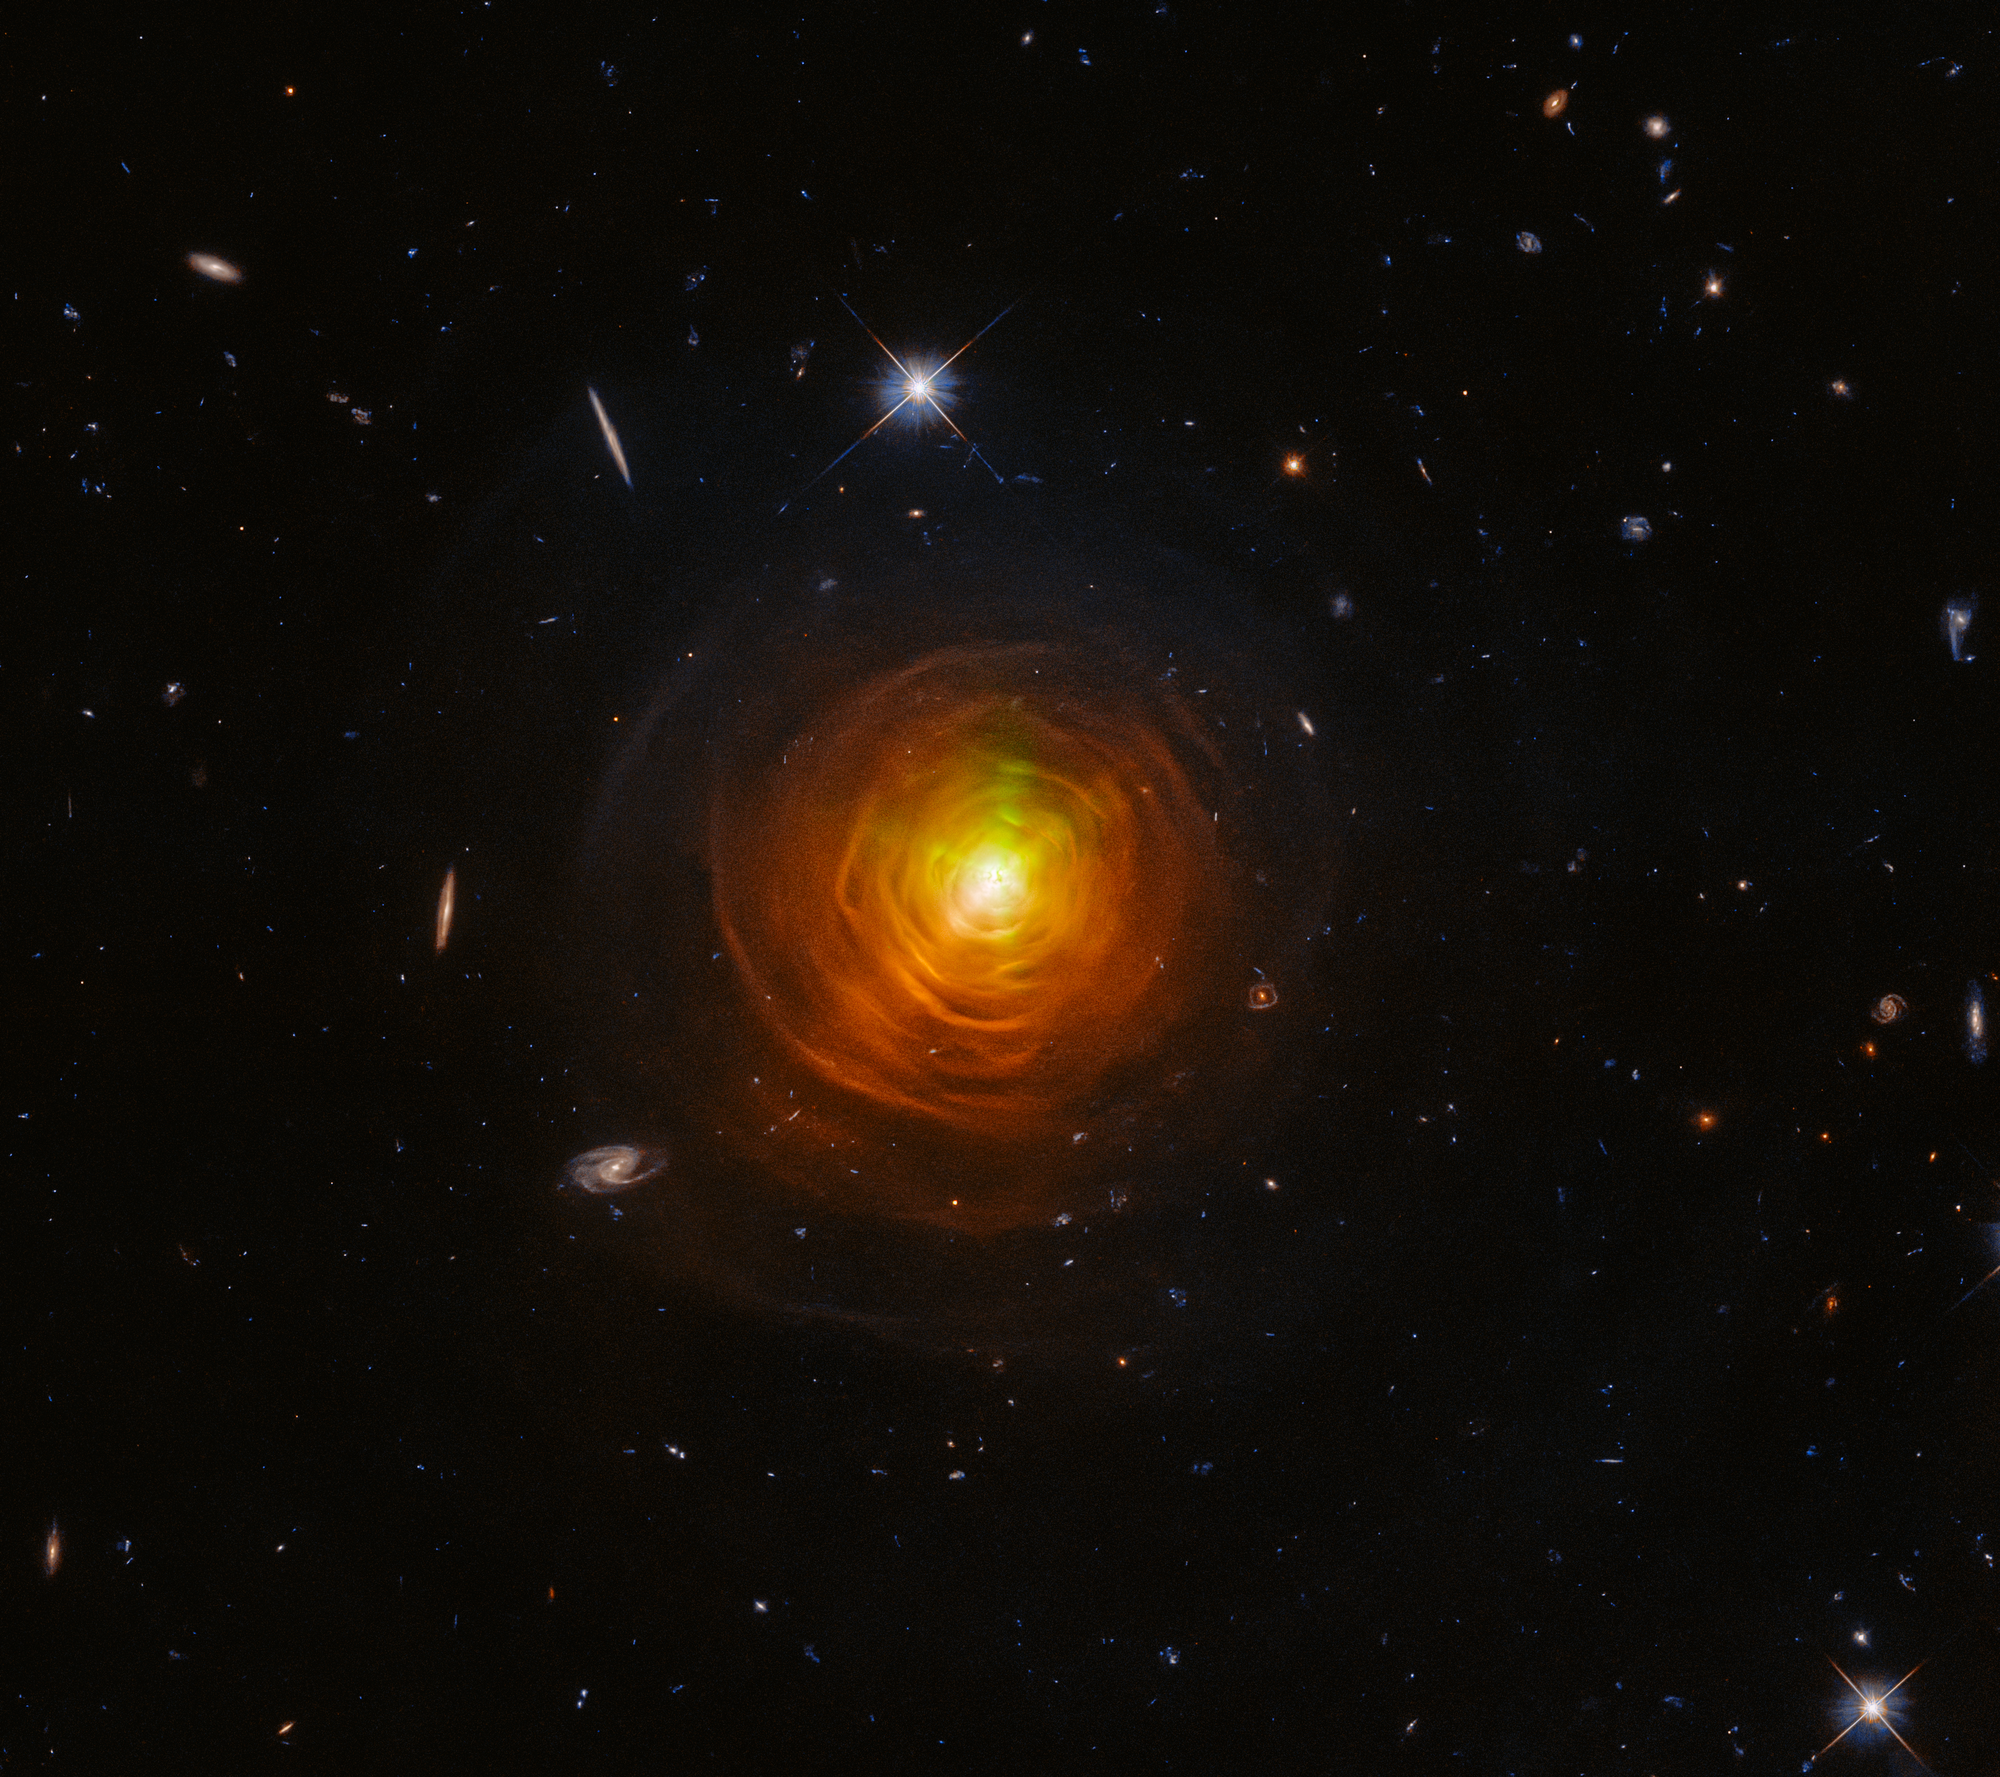 Hubble Celebrates Halloween with a Glowering, Dying Star